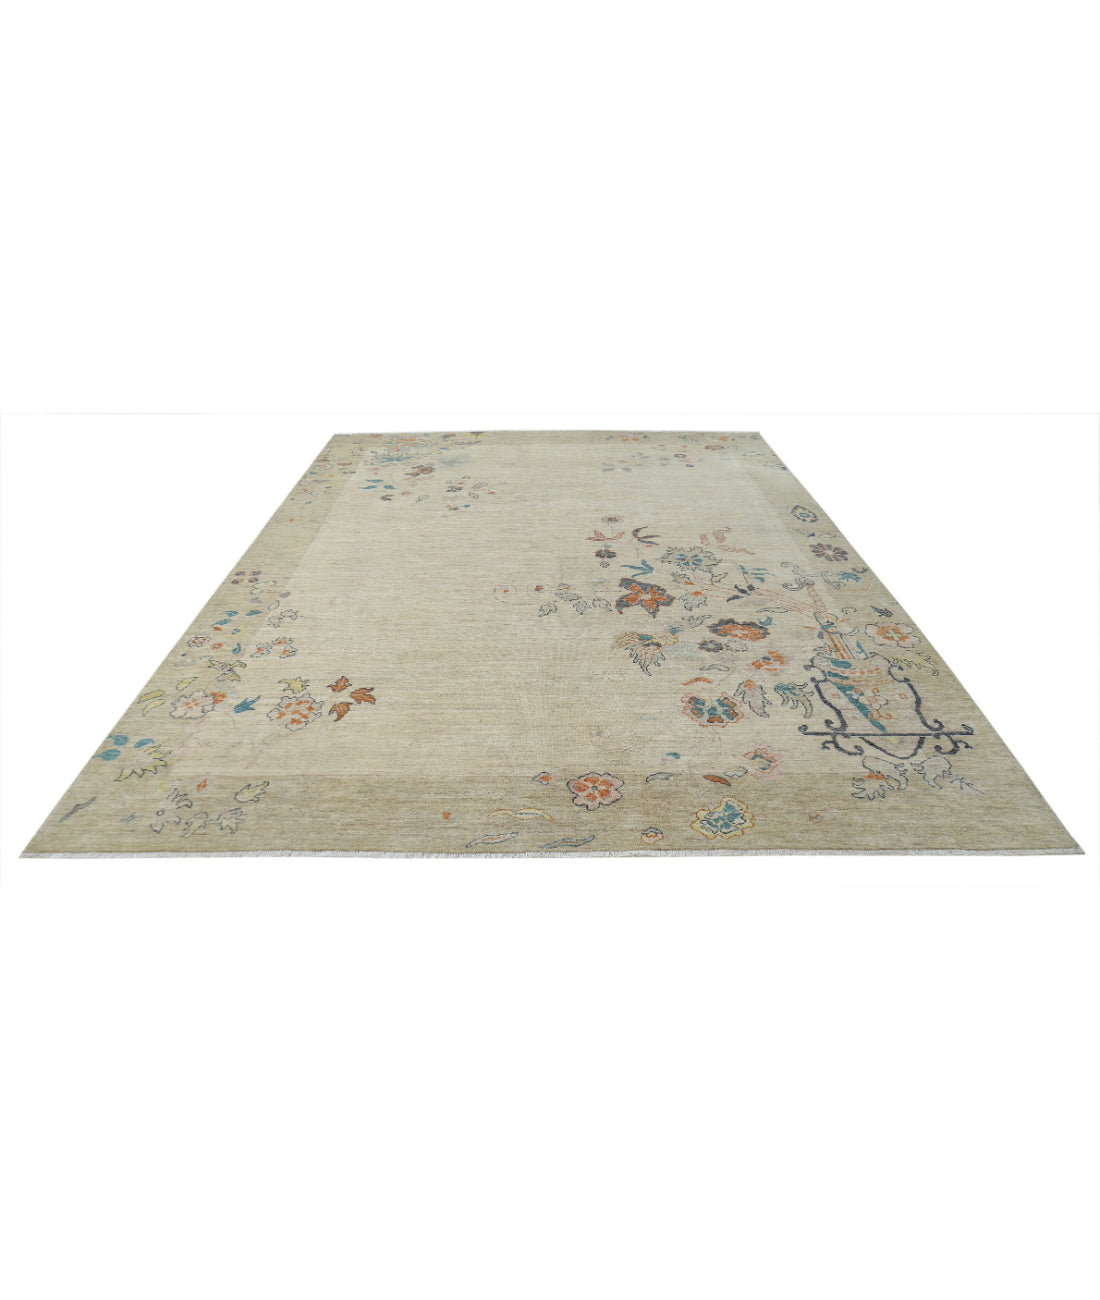 Chinese 8'11'' X 11'11'' Hand-Knotted Wool Rug 8'11'' x 11'11'' (268 X 358) / Gold / Ivory